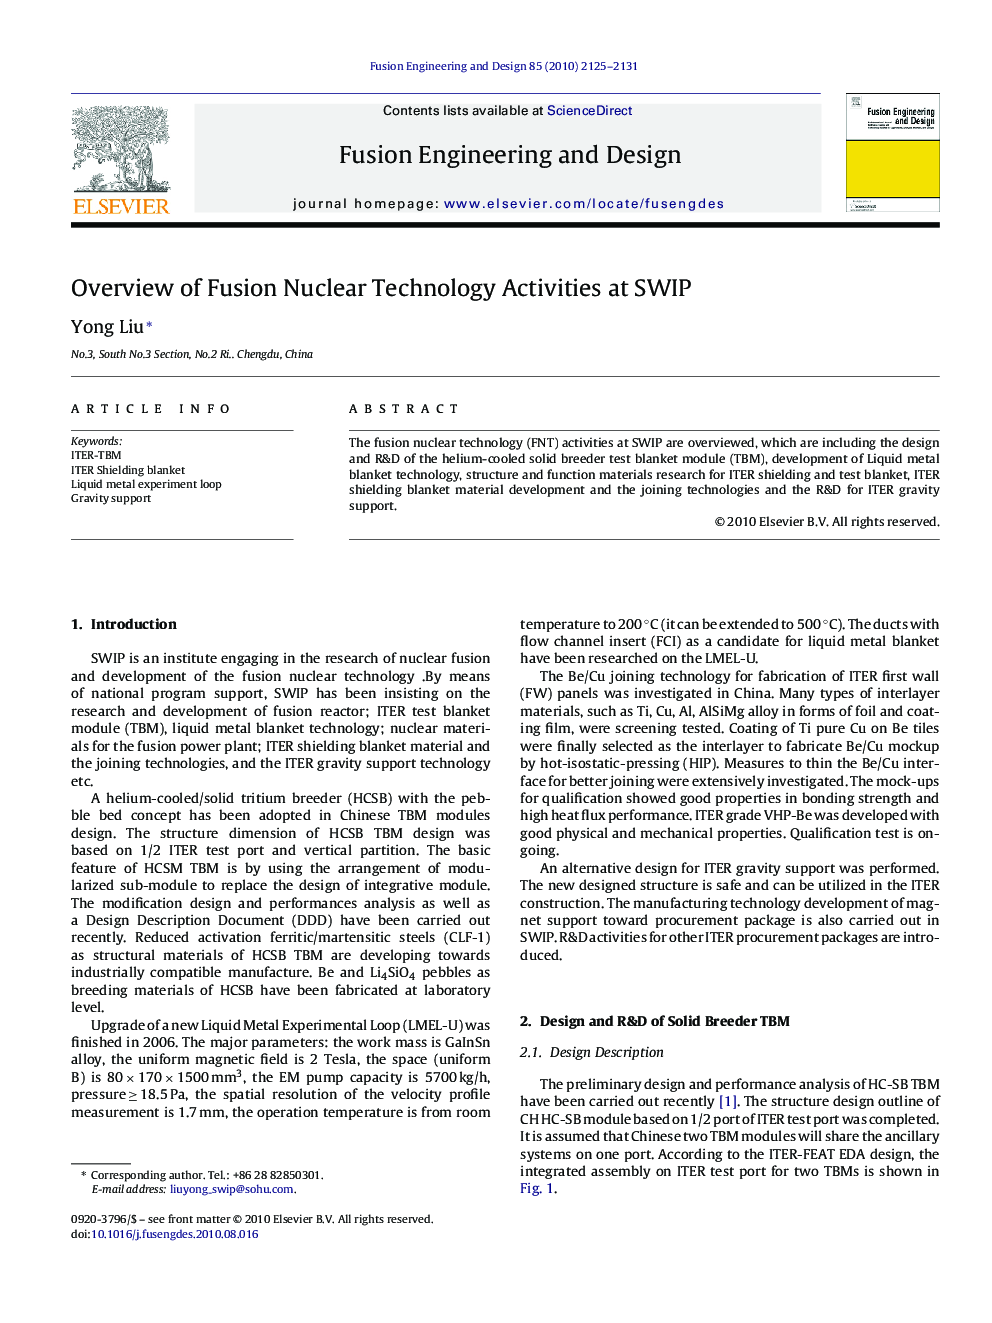 Overview of Fusion Nuclear Technology Activities at SWIP